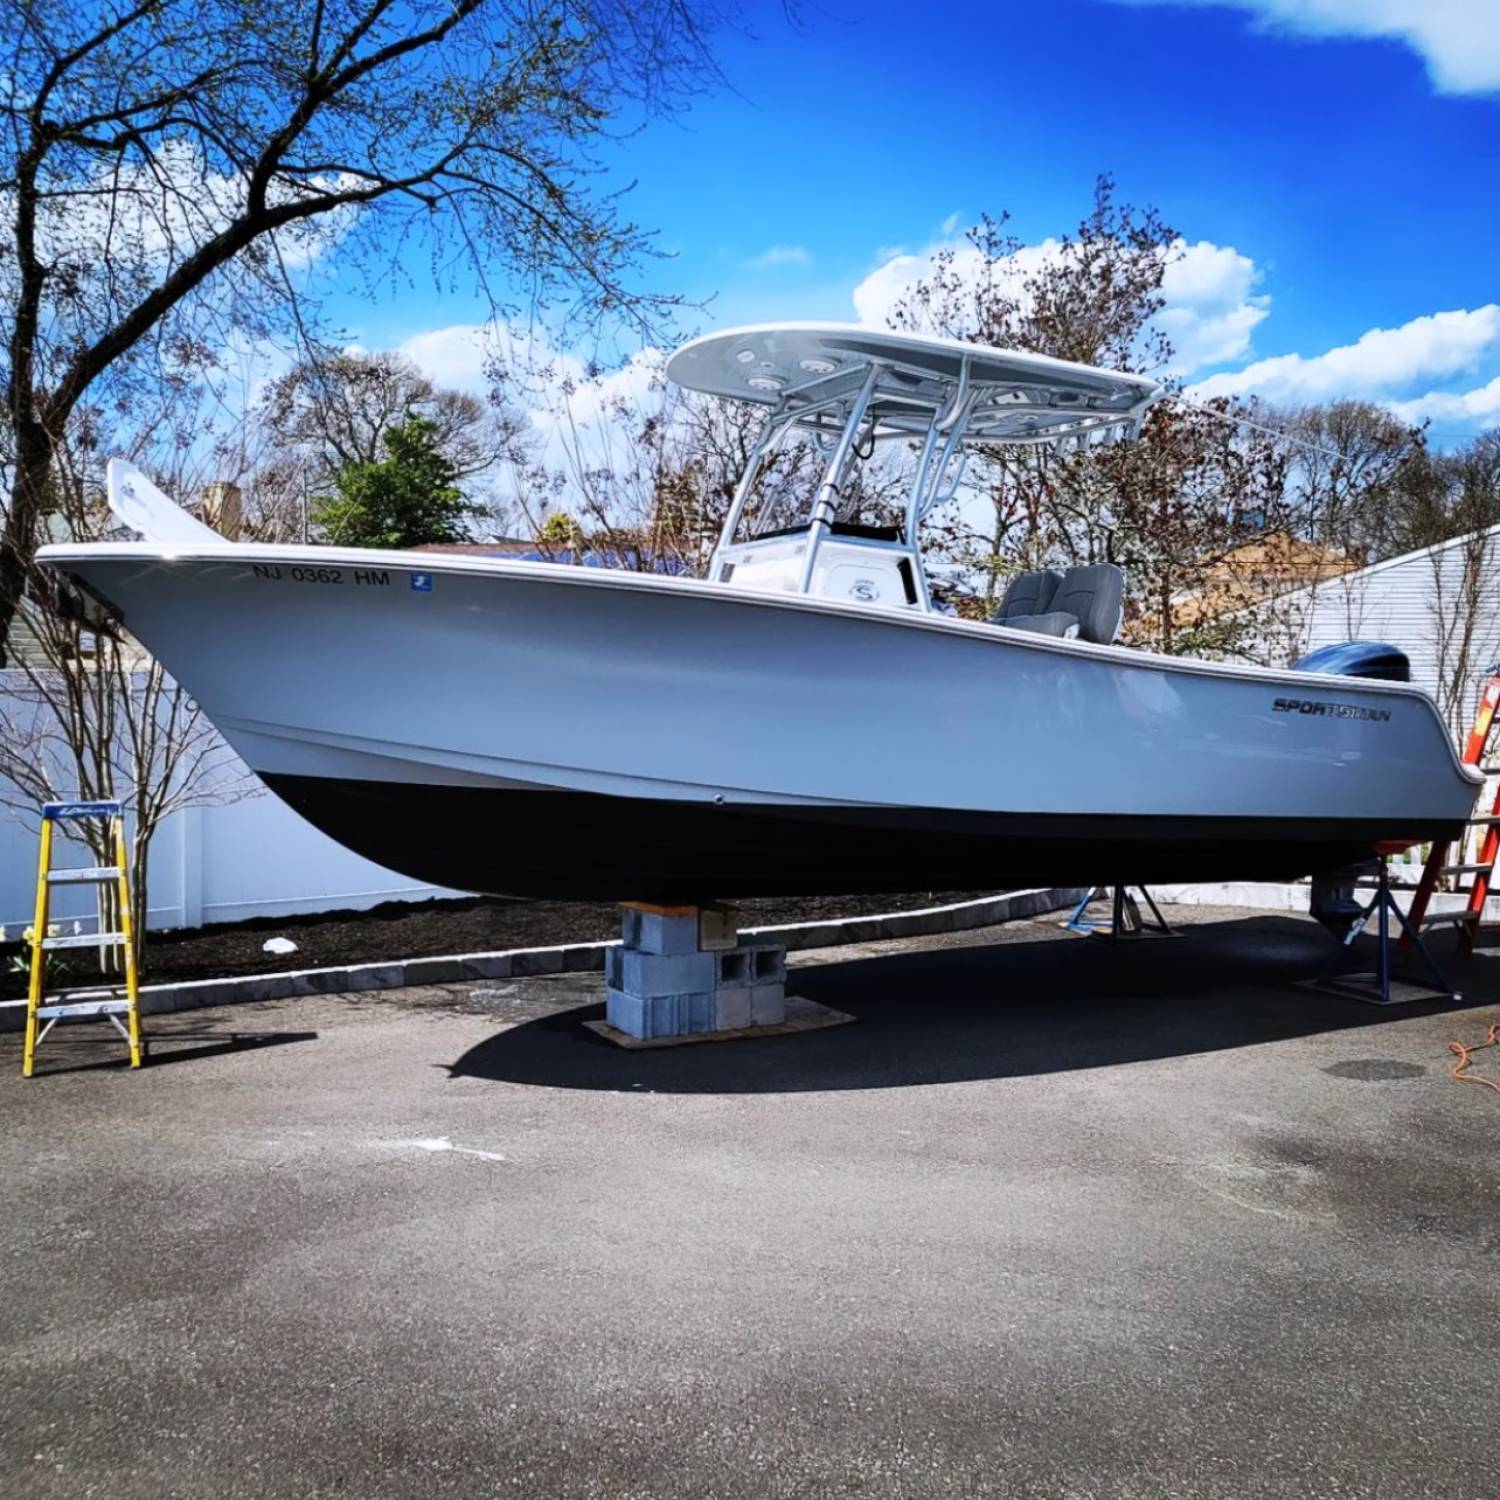 Title: Sportsman NJ - On board their Sportsman Open 282 Center Console - Location: Point Pleasant, New Jersey. Participating in the Photo Contest #SportsmanApril